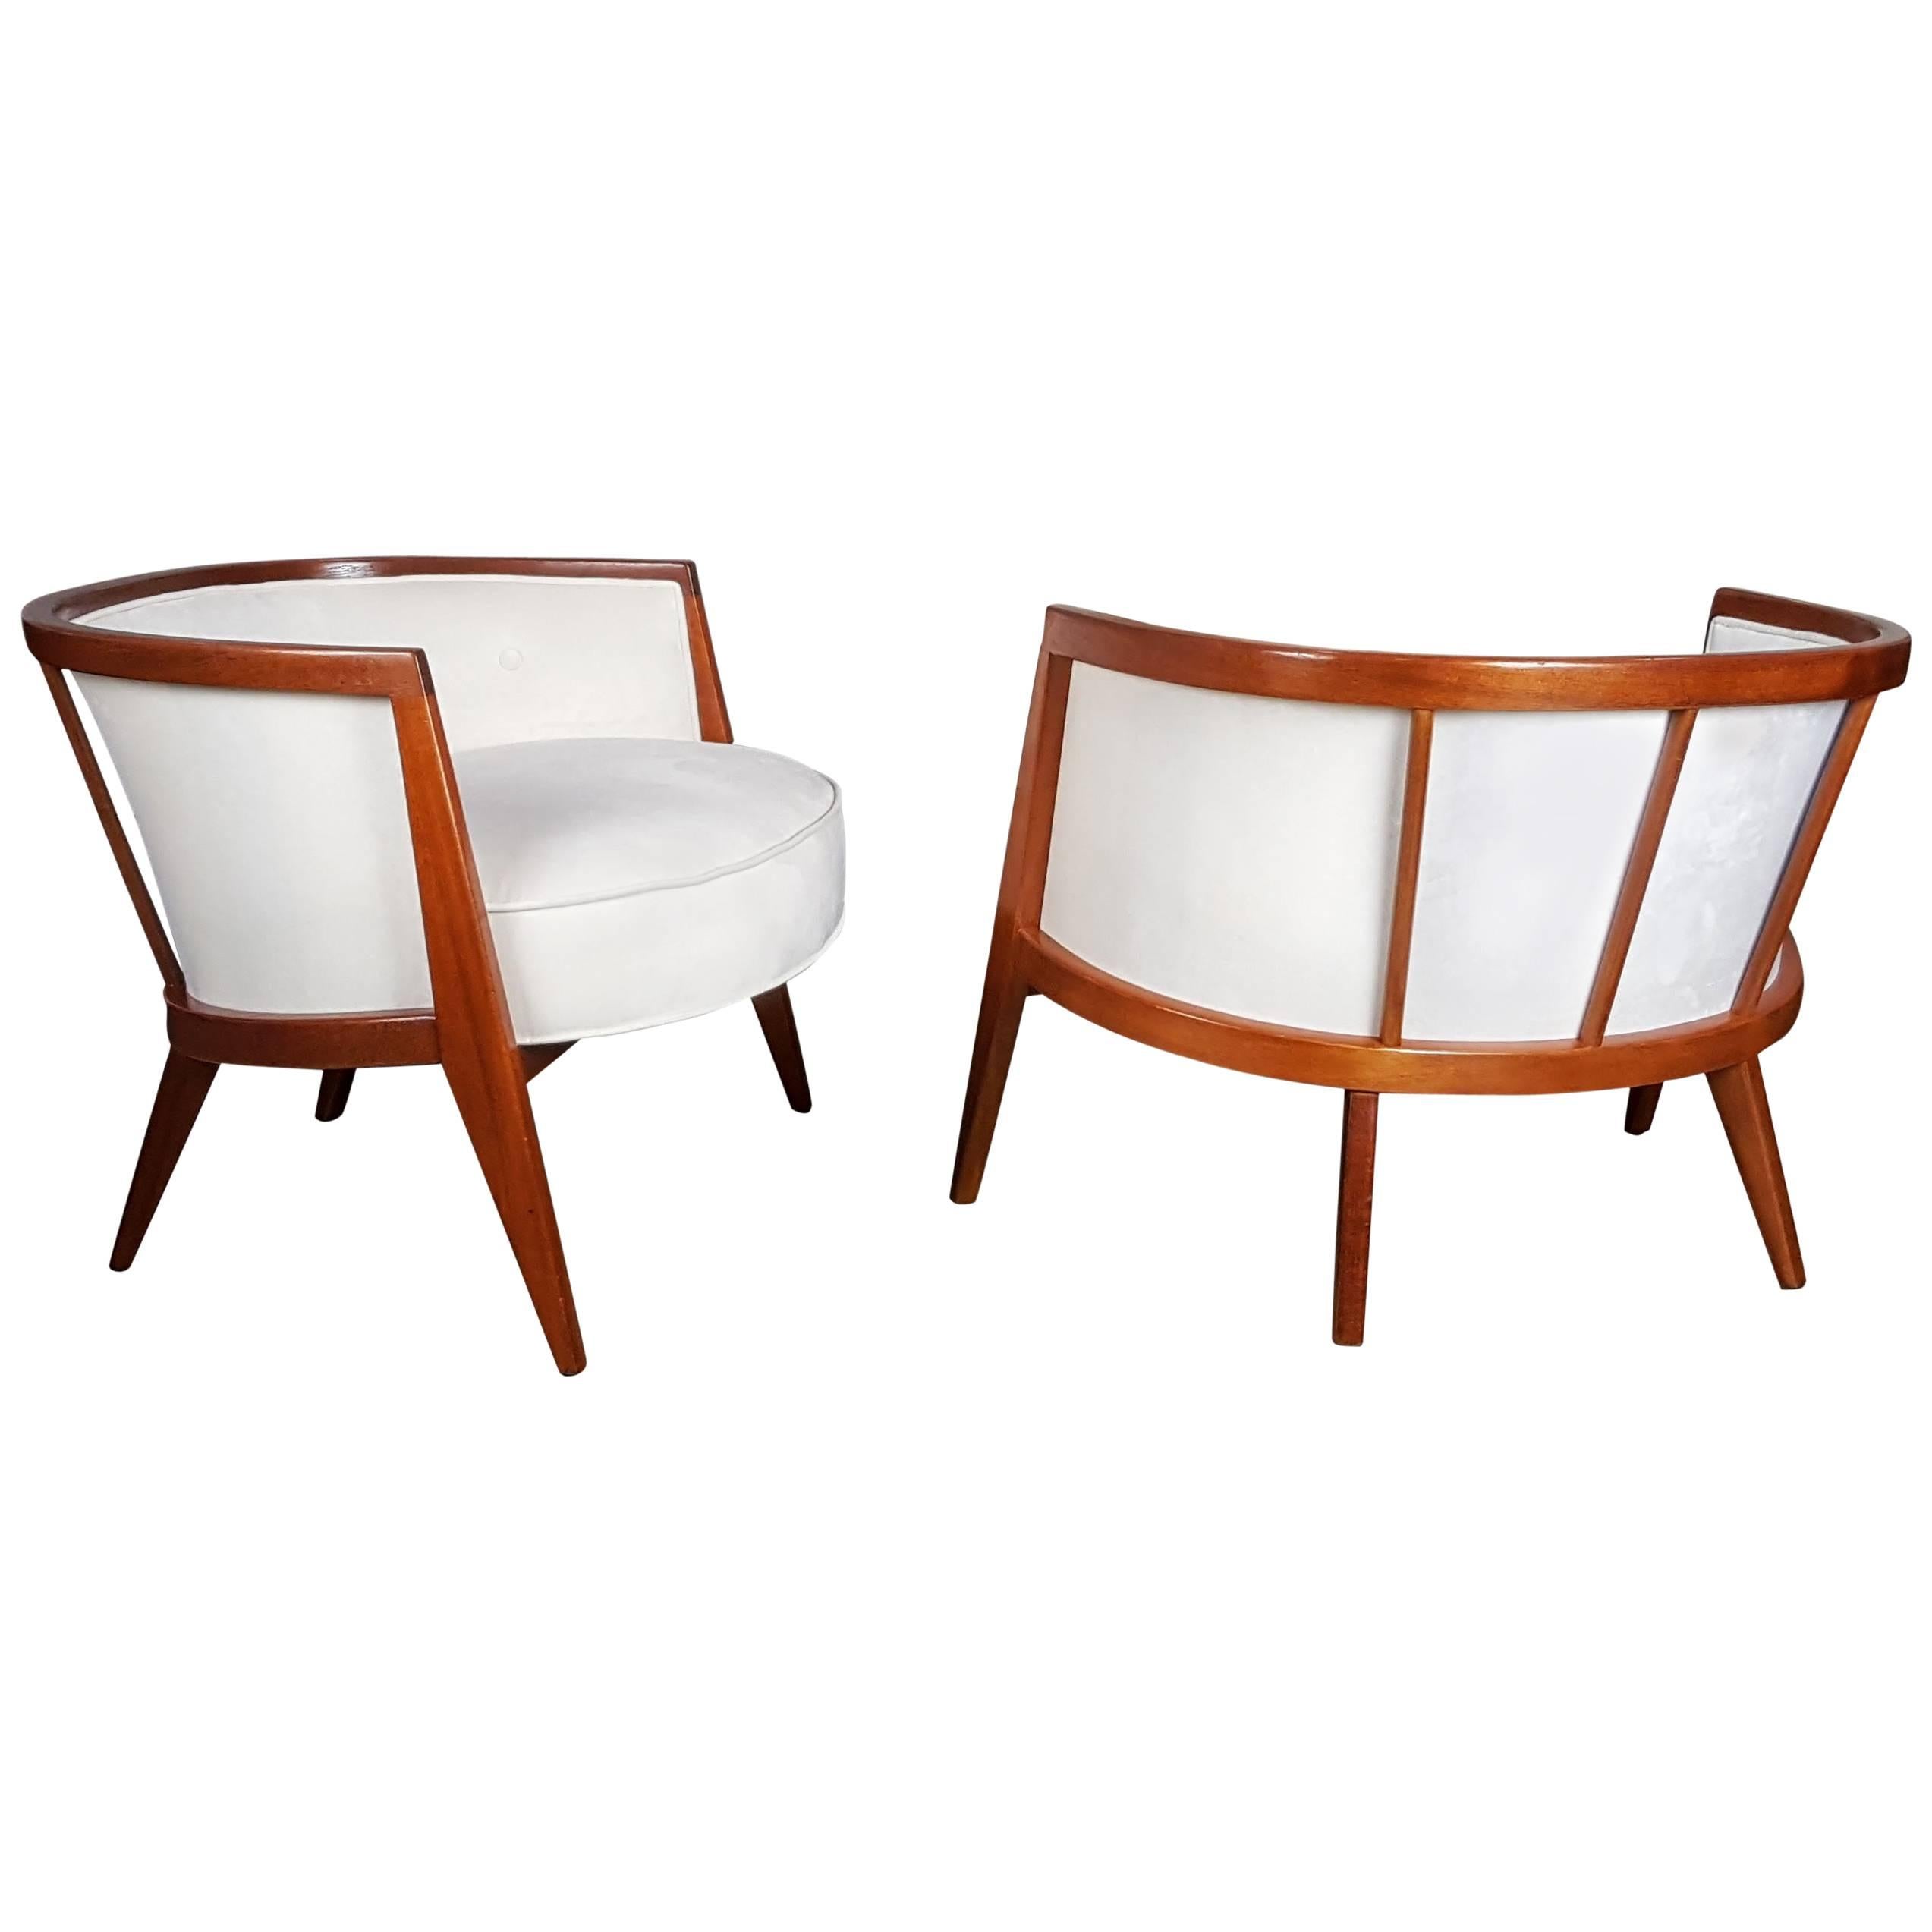 Sculptural Mahogany Lounge Chairs by Harvey Probber, 1960s